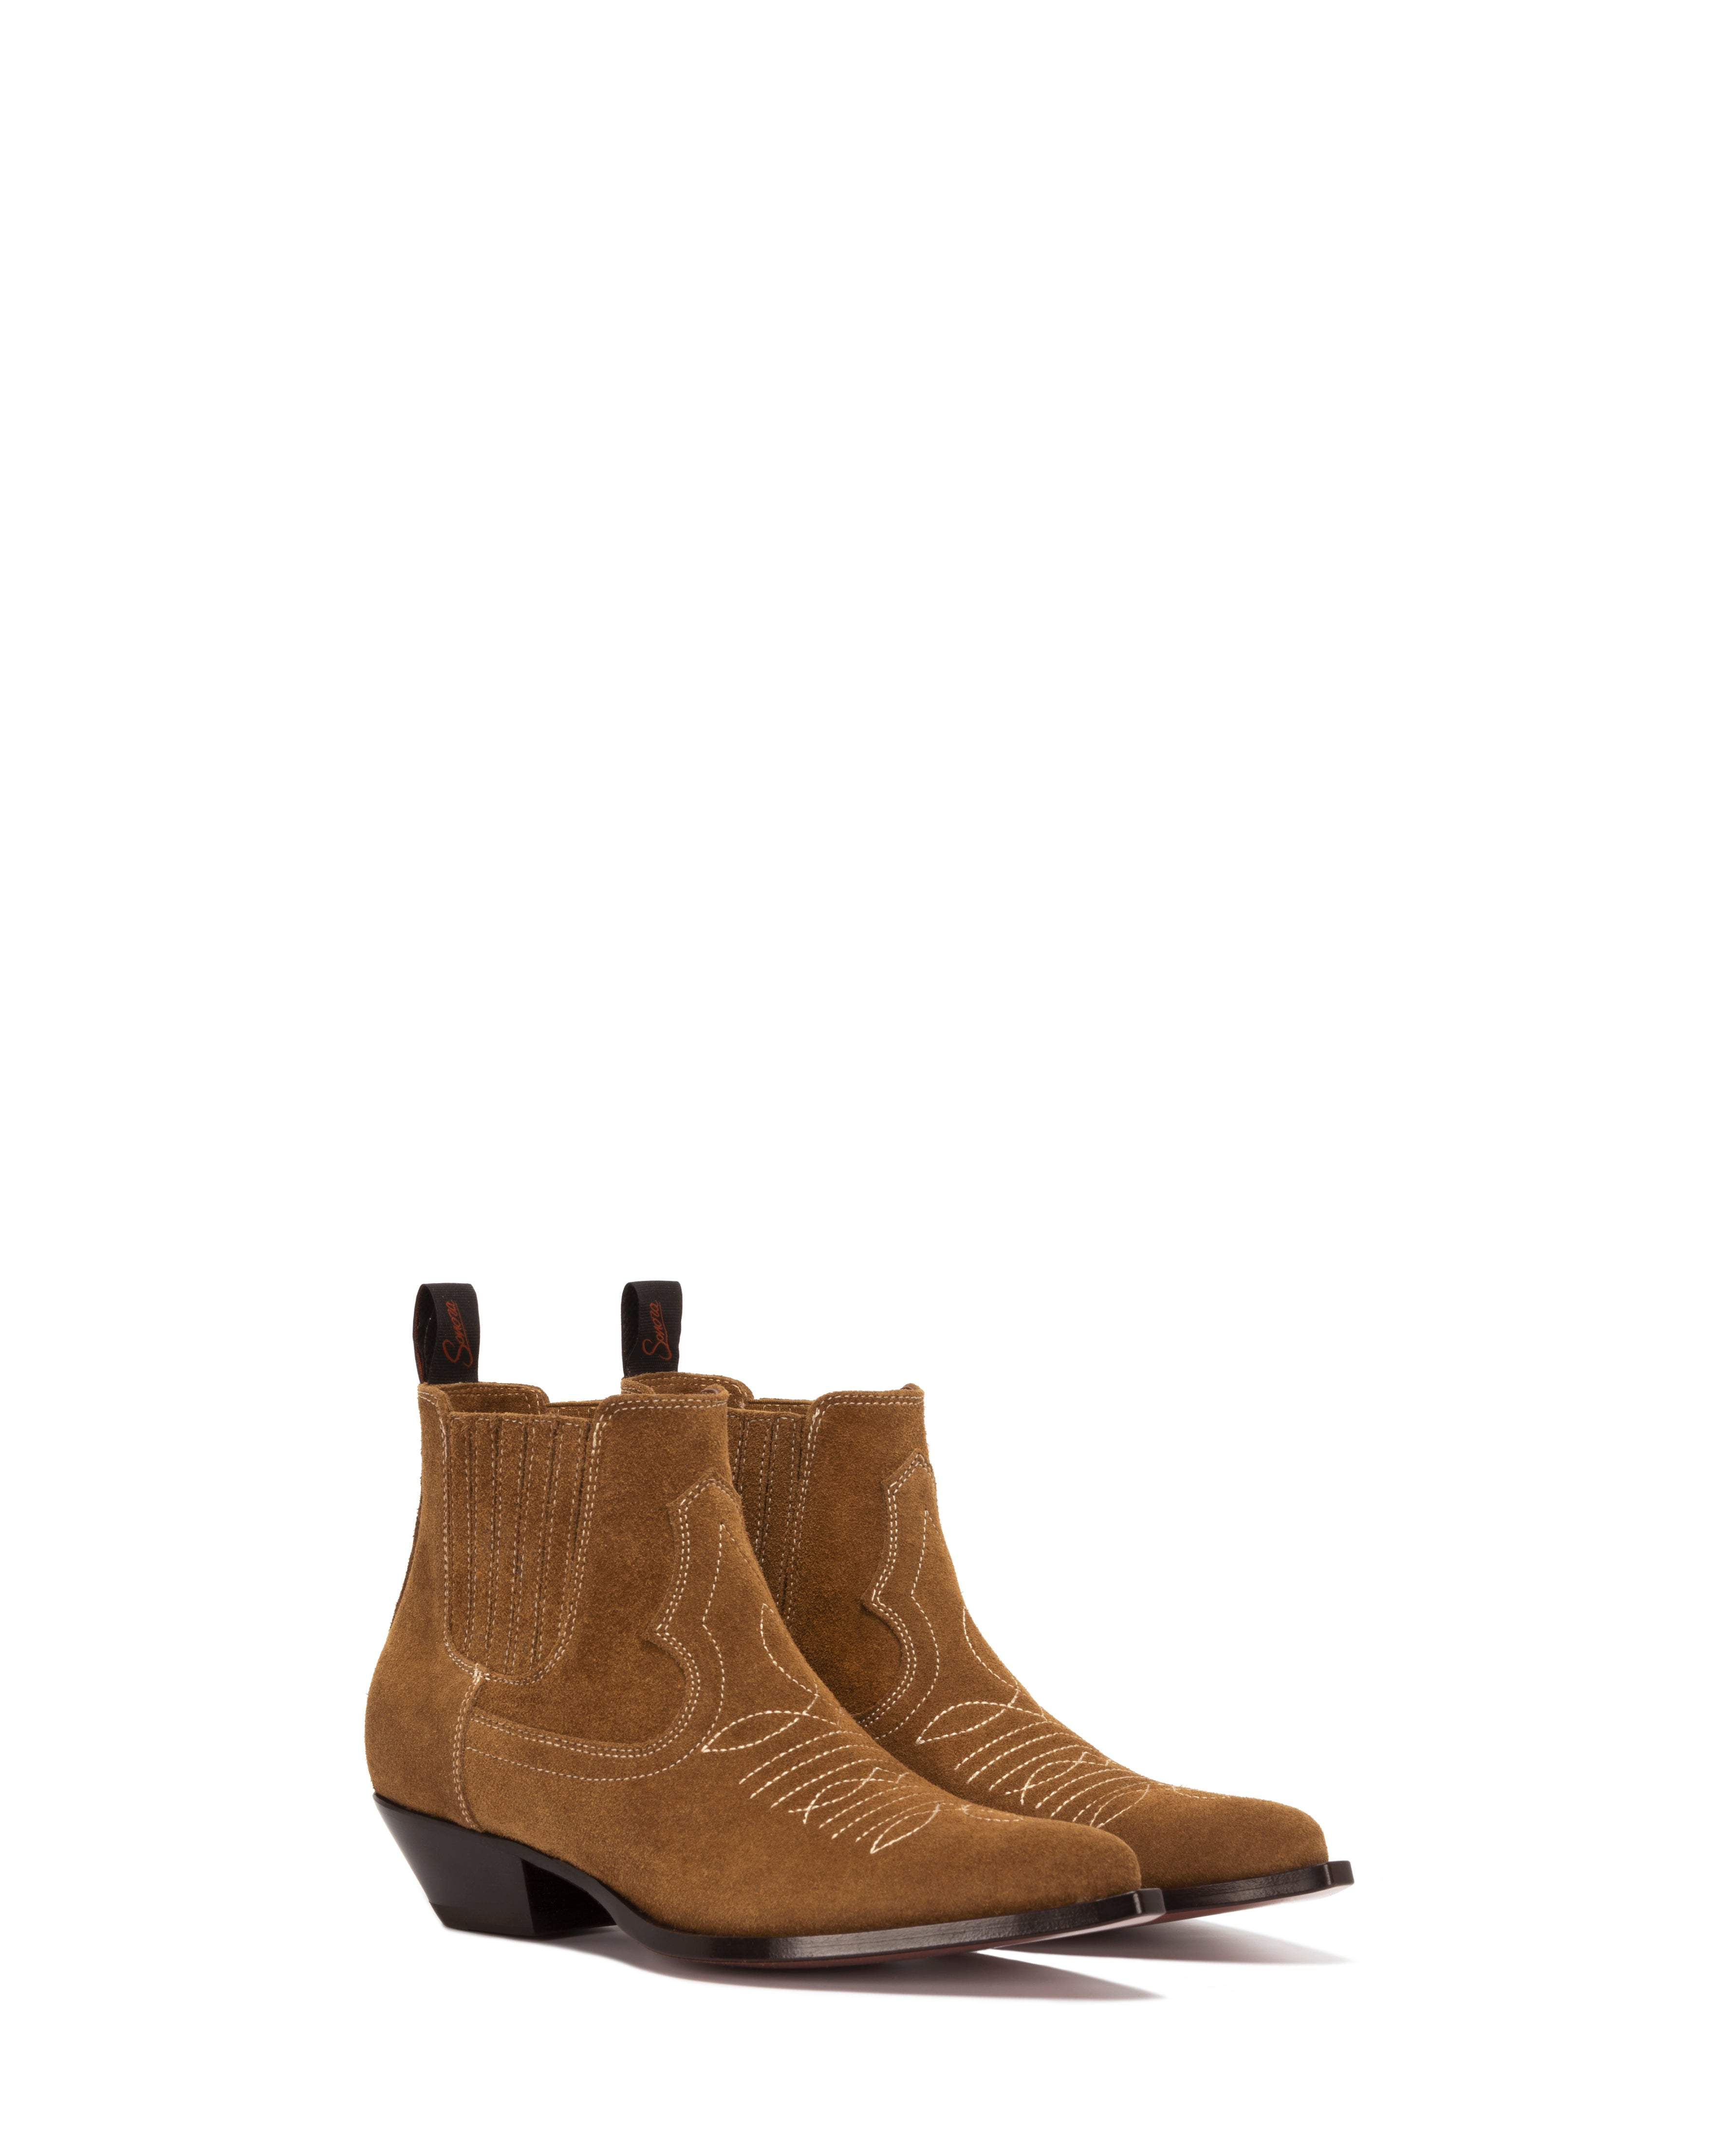 HIDALGO Women's Ankle Boots in Cigar Suede | Ecru Embroidery_02